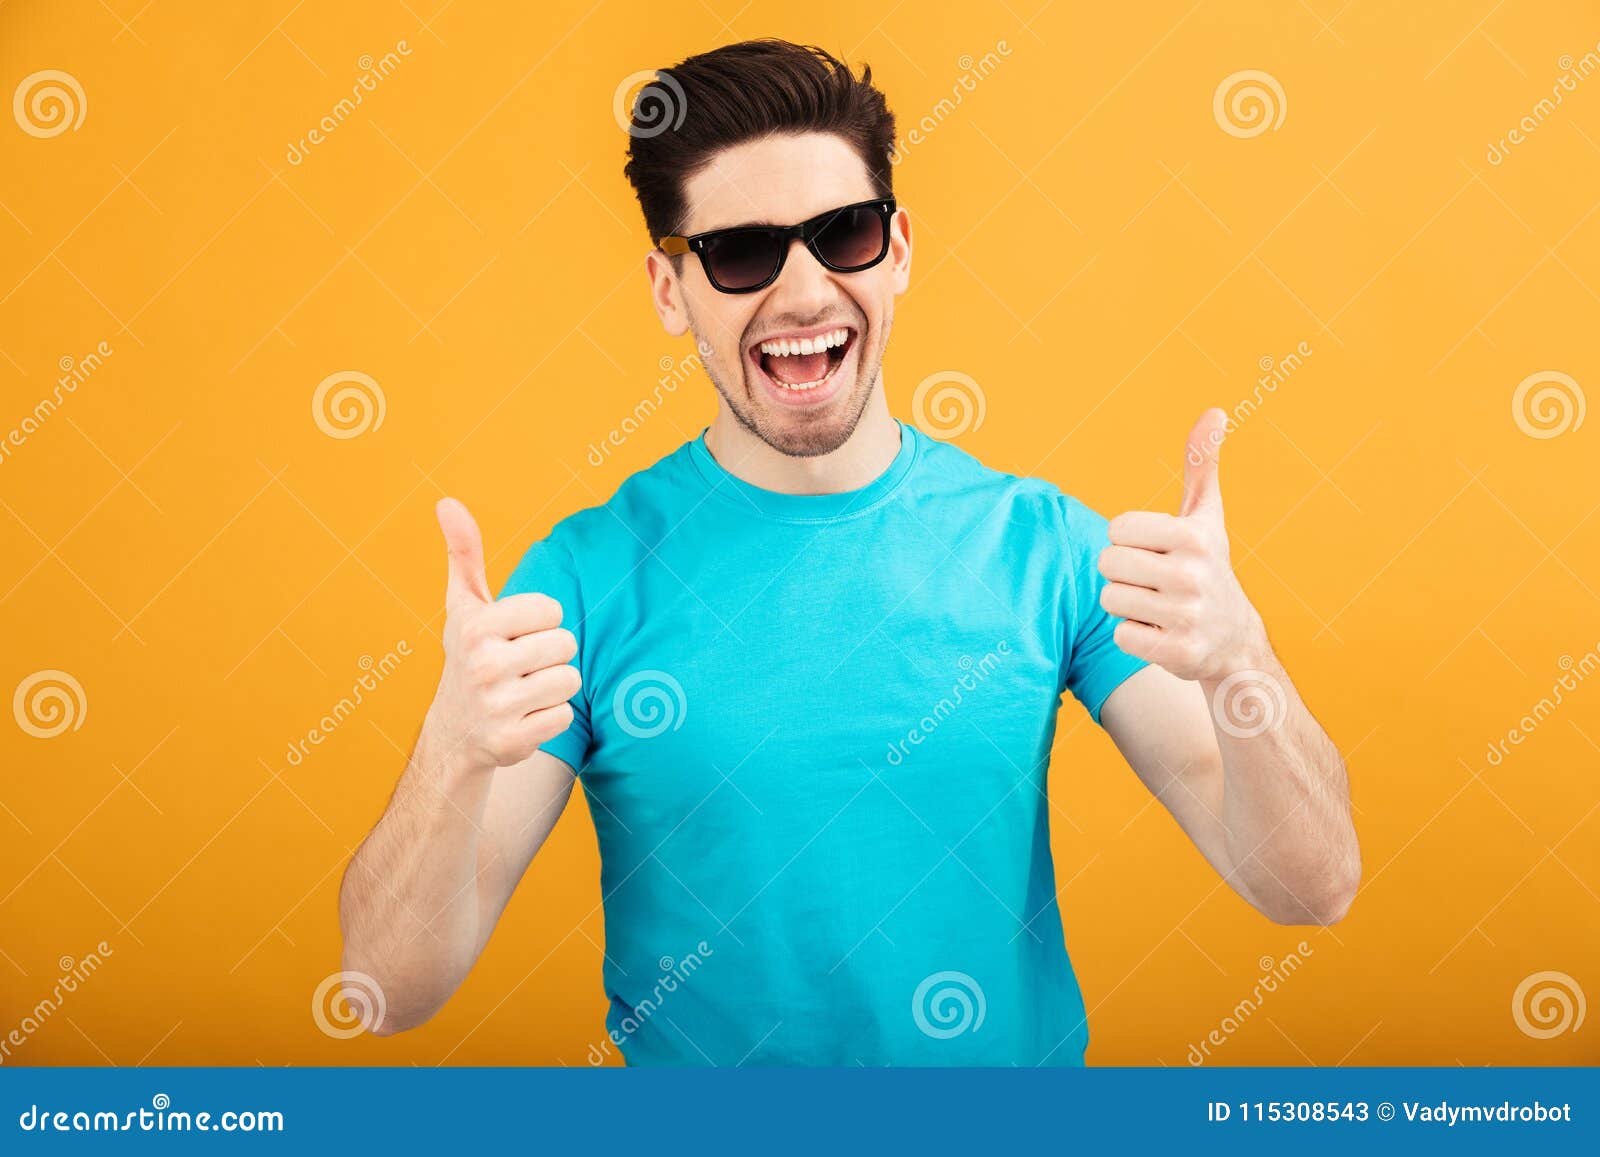 Portrait of a Happy Young Man in Sunglasses Stock Image - Image of ...